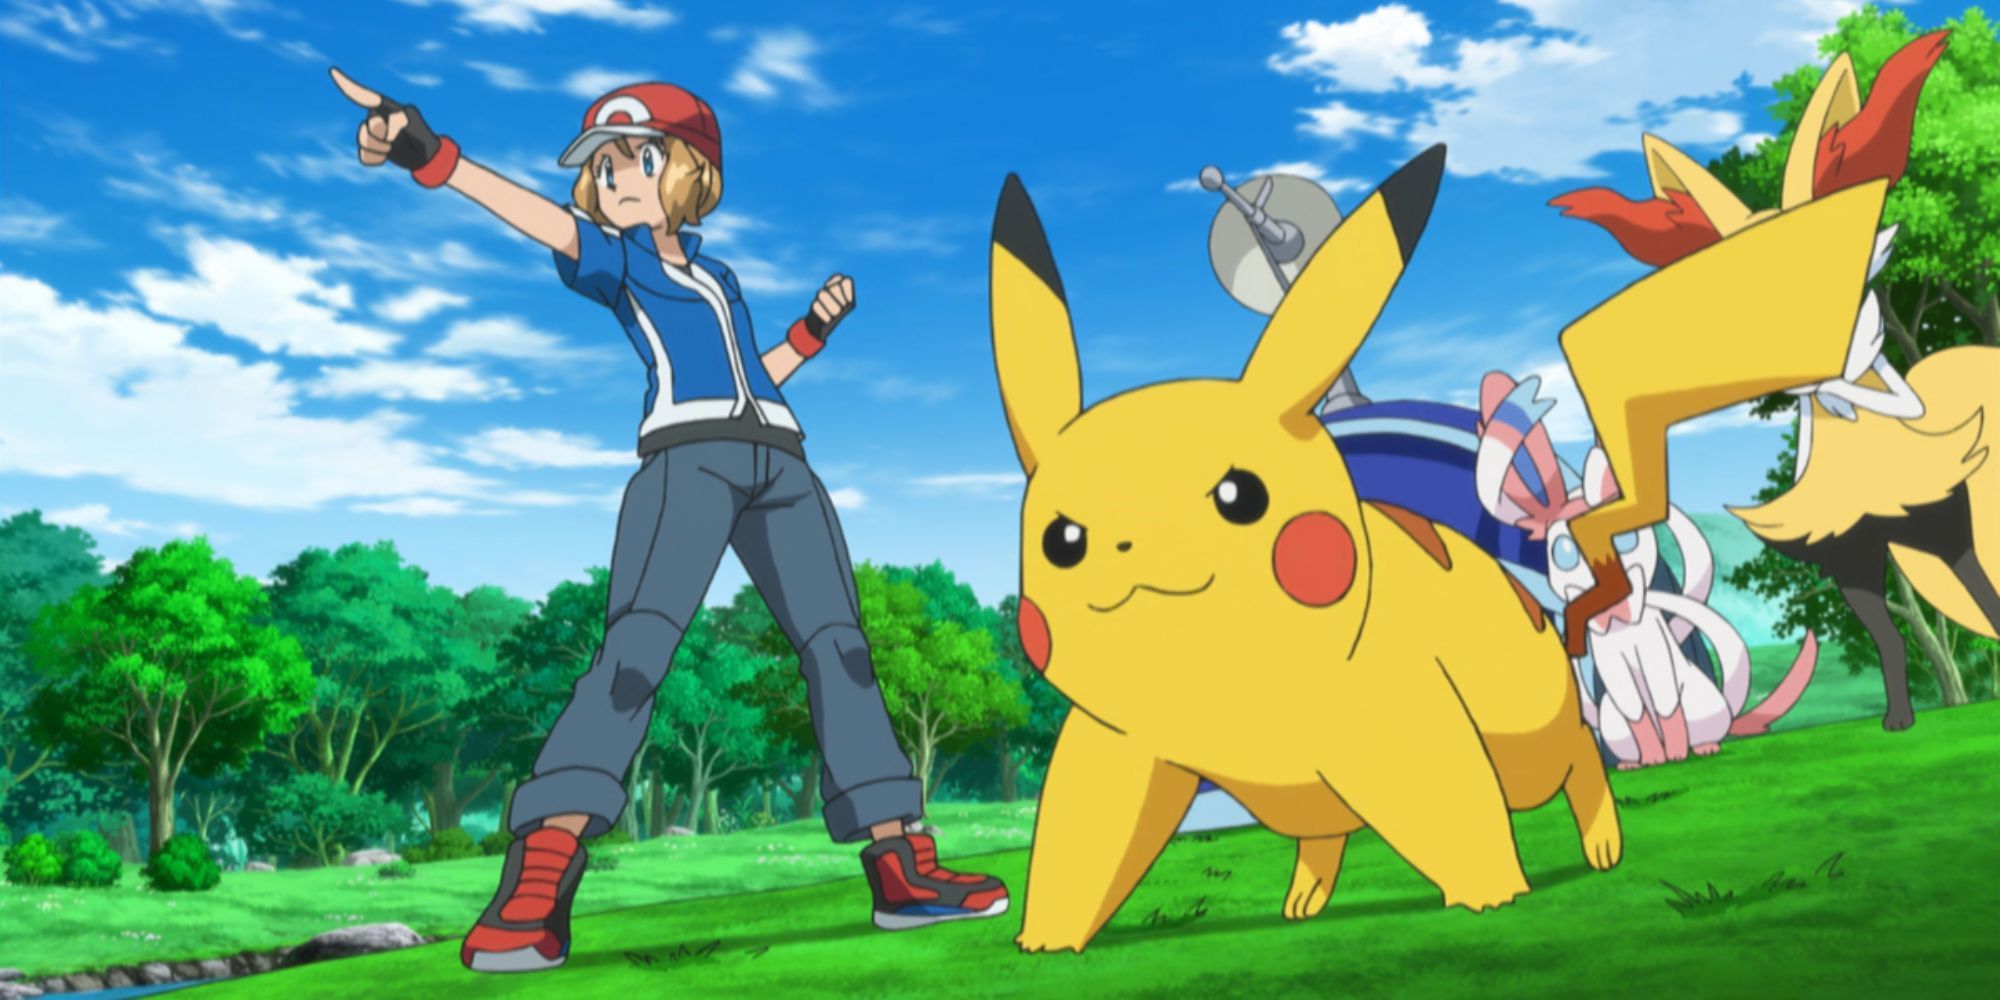 A disguised Serena fights alongside Pikachu.